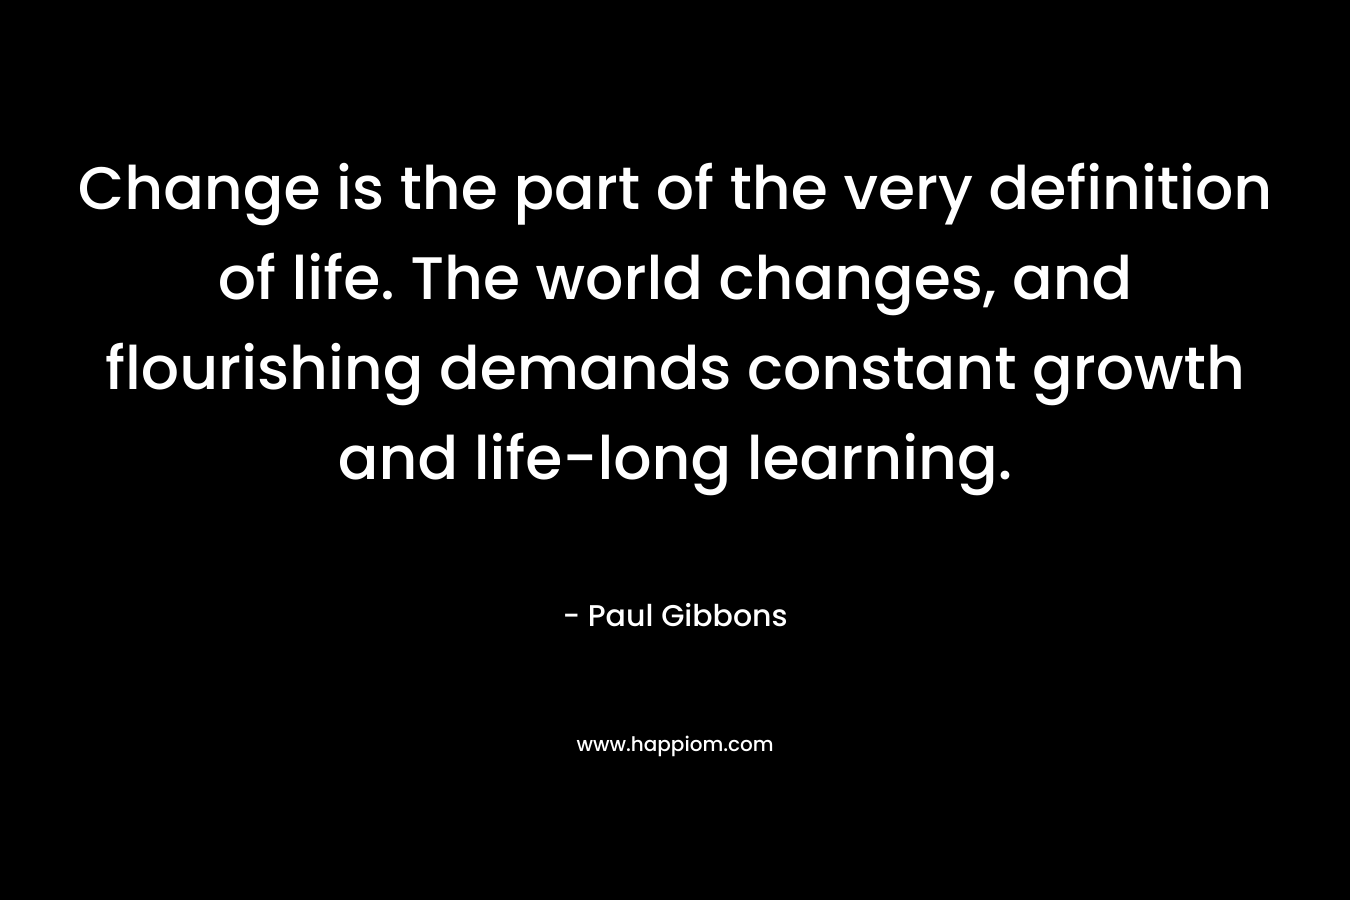 Change is the part of the very definition of life. The world changes, and flourishing demands constant growth and life-long learning. – Paul Gibbons